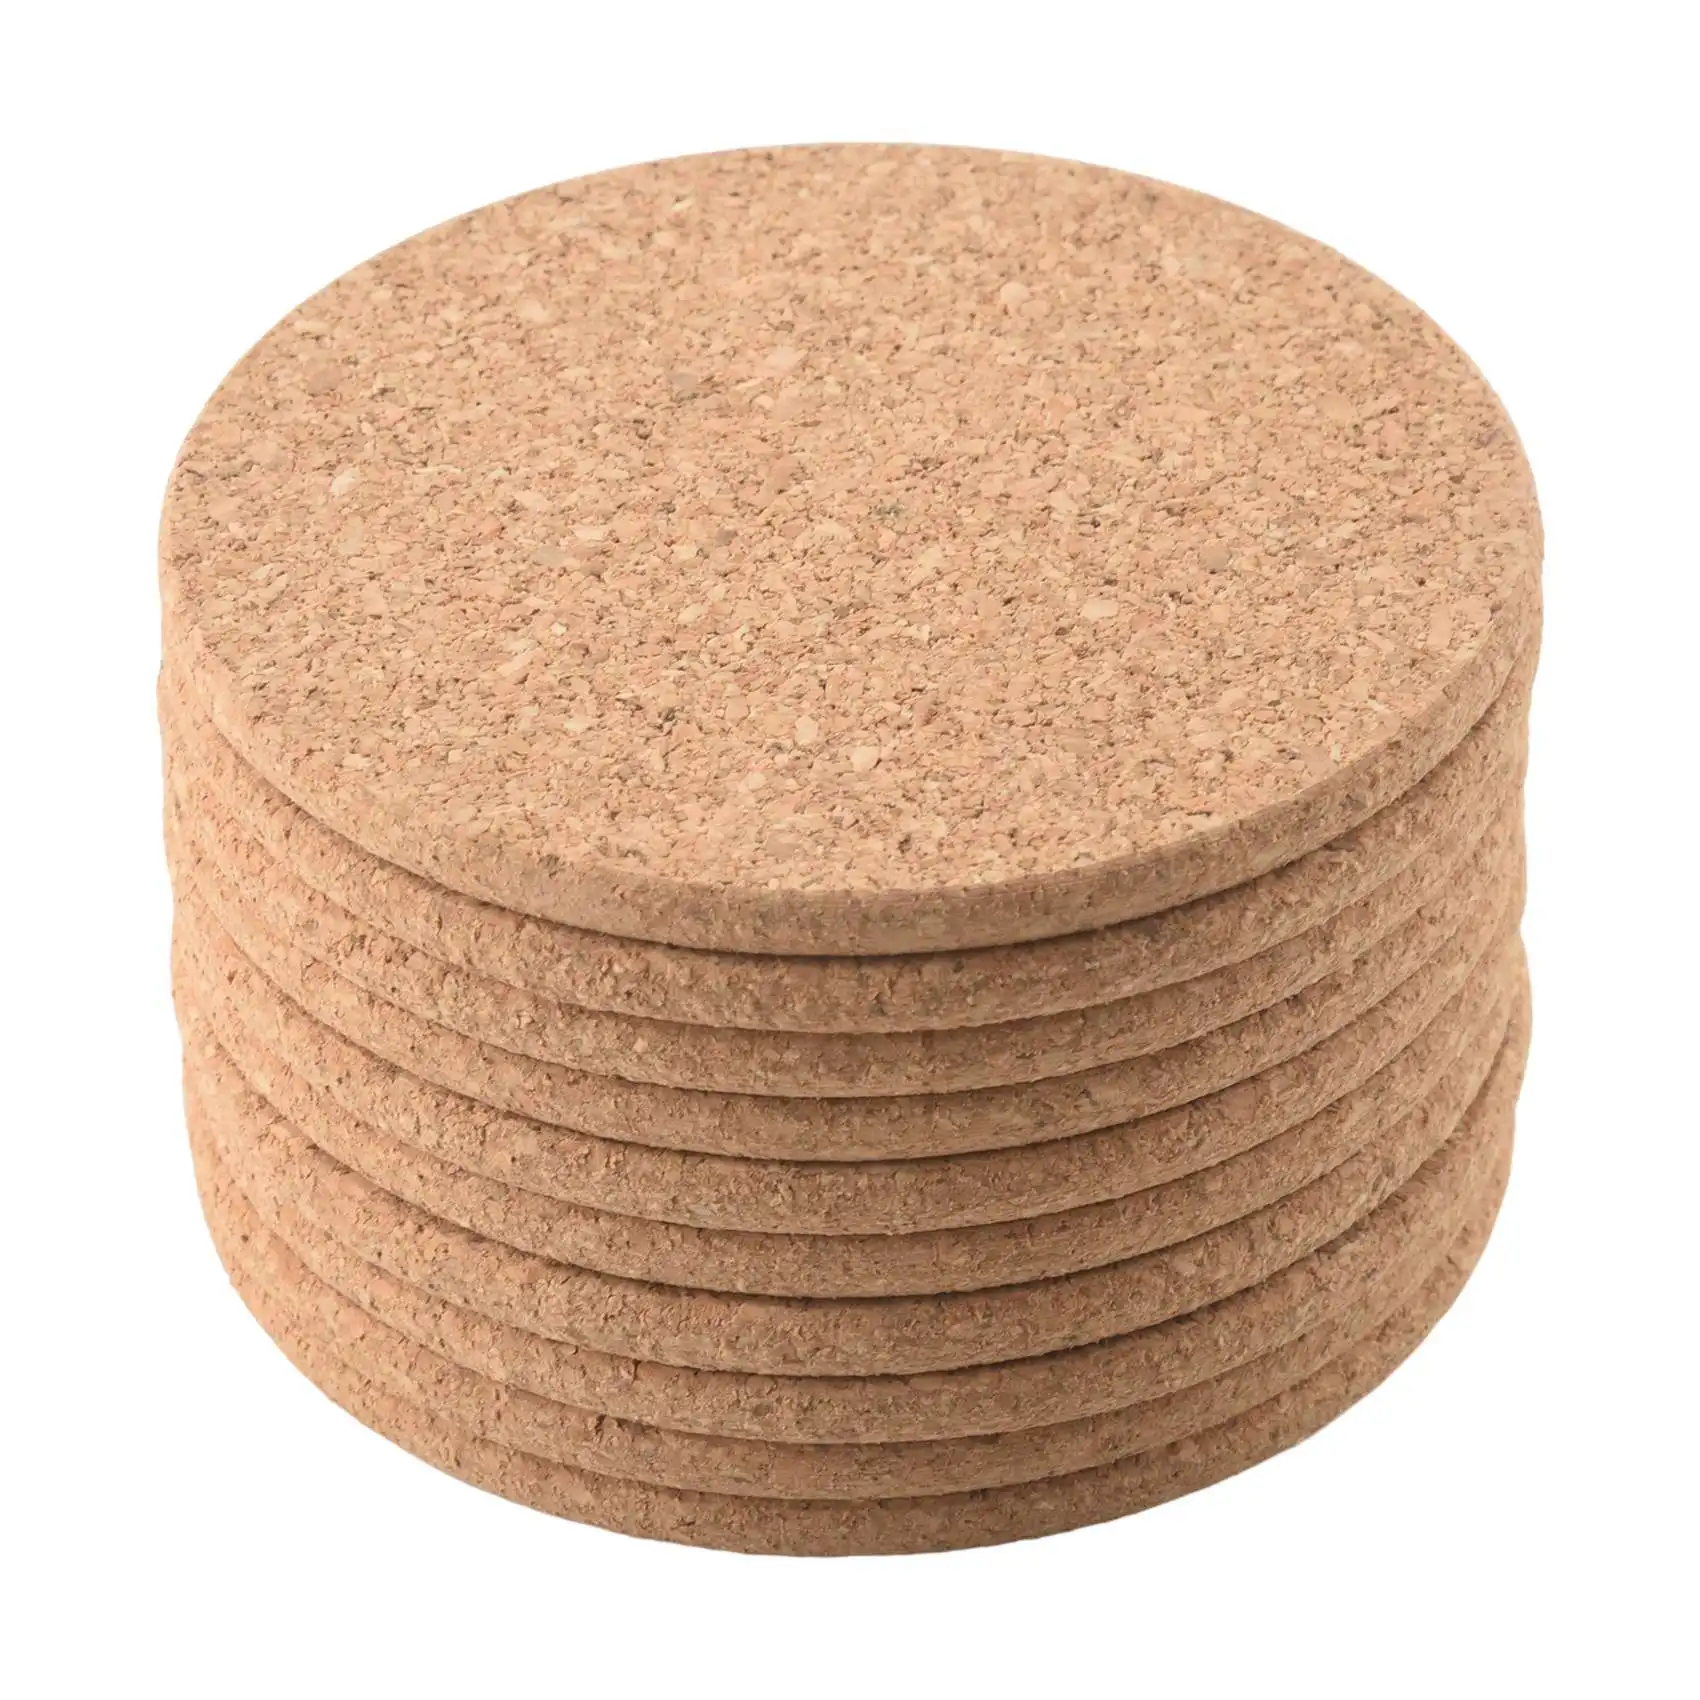 

10 Cork Bar Drink Coasters - Absorbent and Reusable - 90mm, 5mm Thick